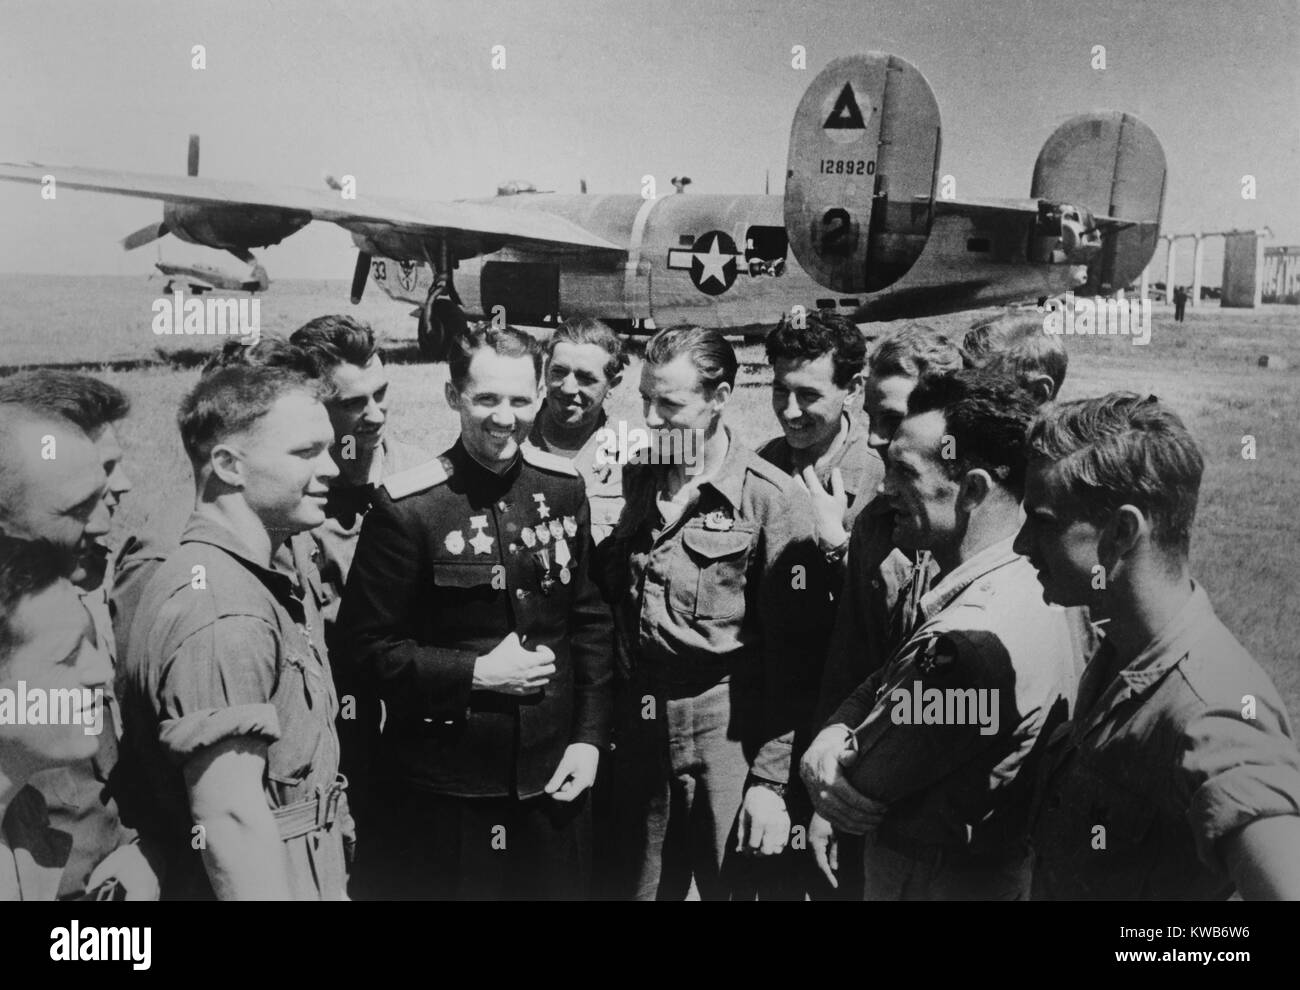 Soviet (Russian) World War 2 ace Mikhail Avdeev with American pilots. In the background is a Consolidated B-24 Liberator bomber, at Sevastopol, Ukraine, 1944. Photo by Evgeni Khaldei. (BSLOC 2014 8 54) Stock Photo